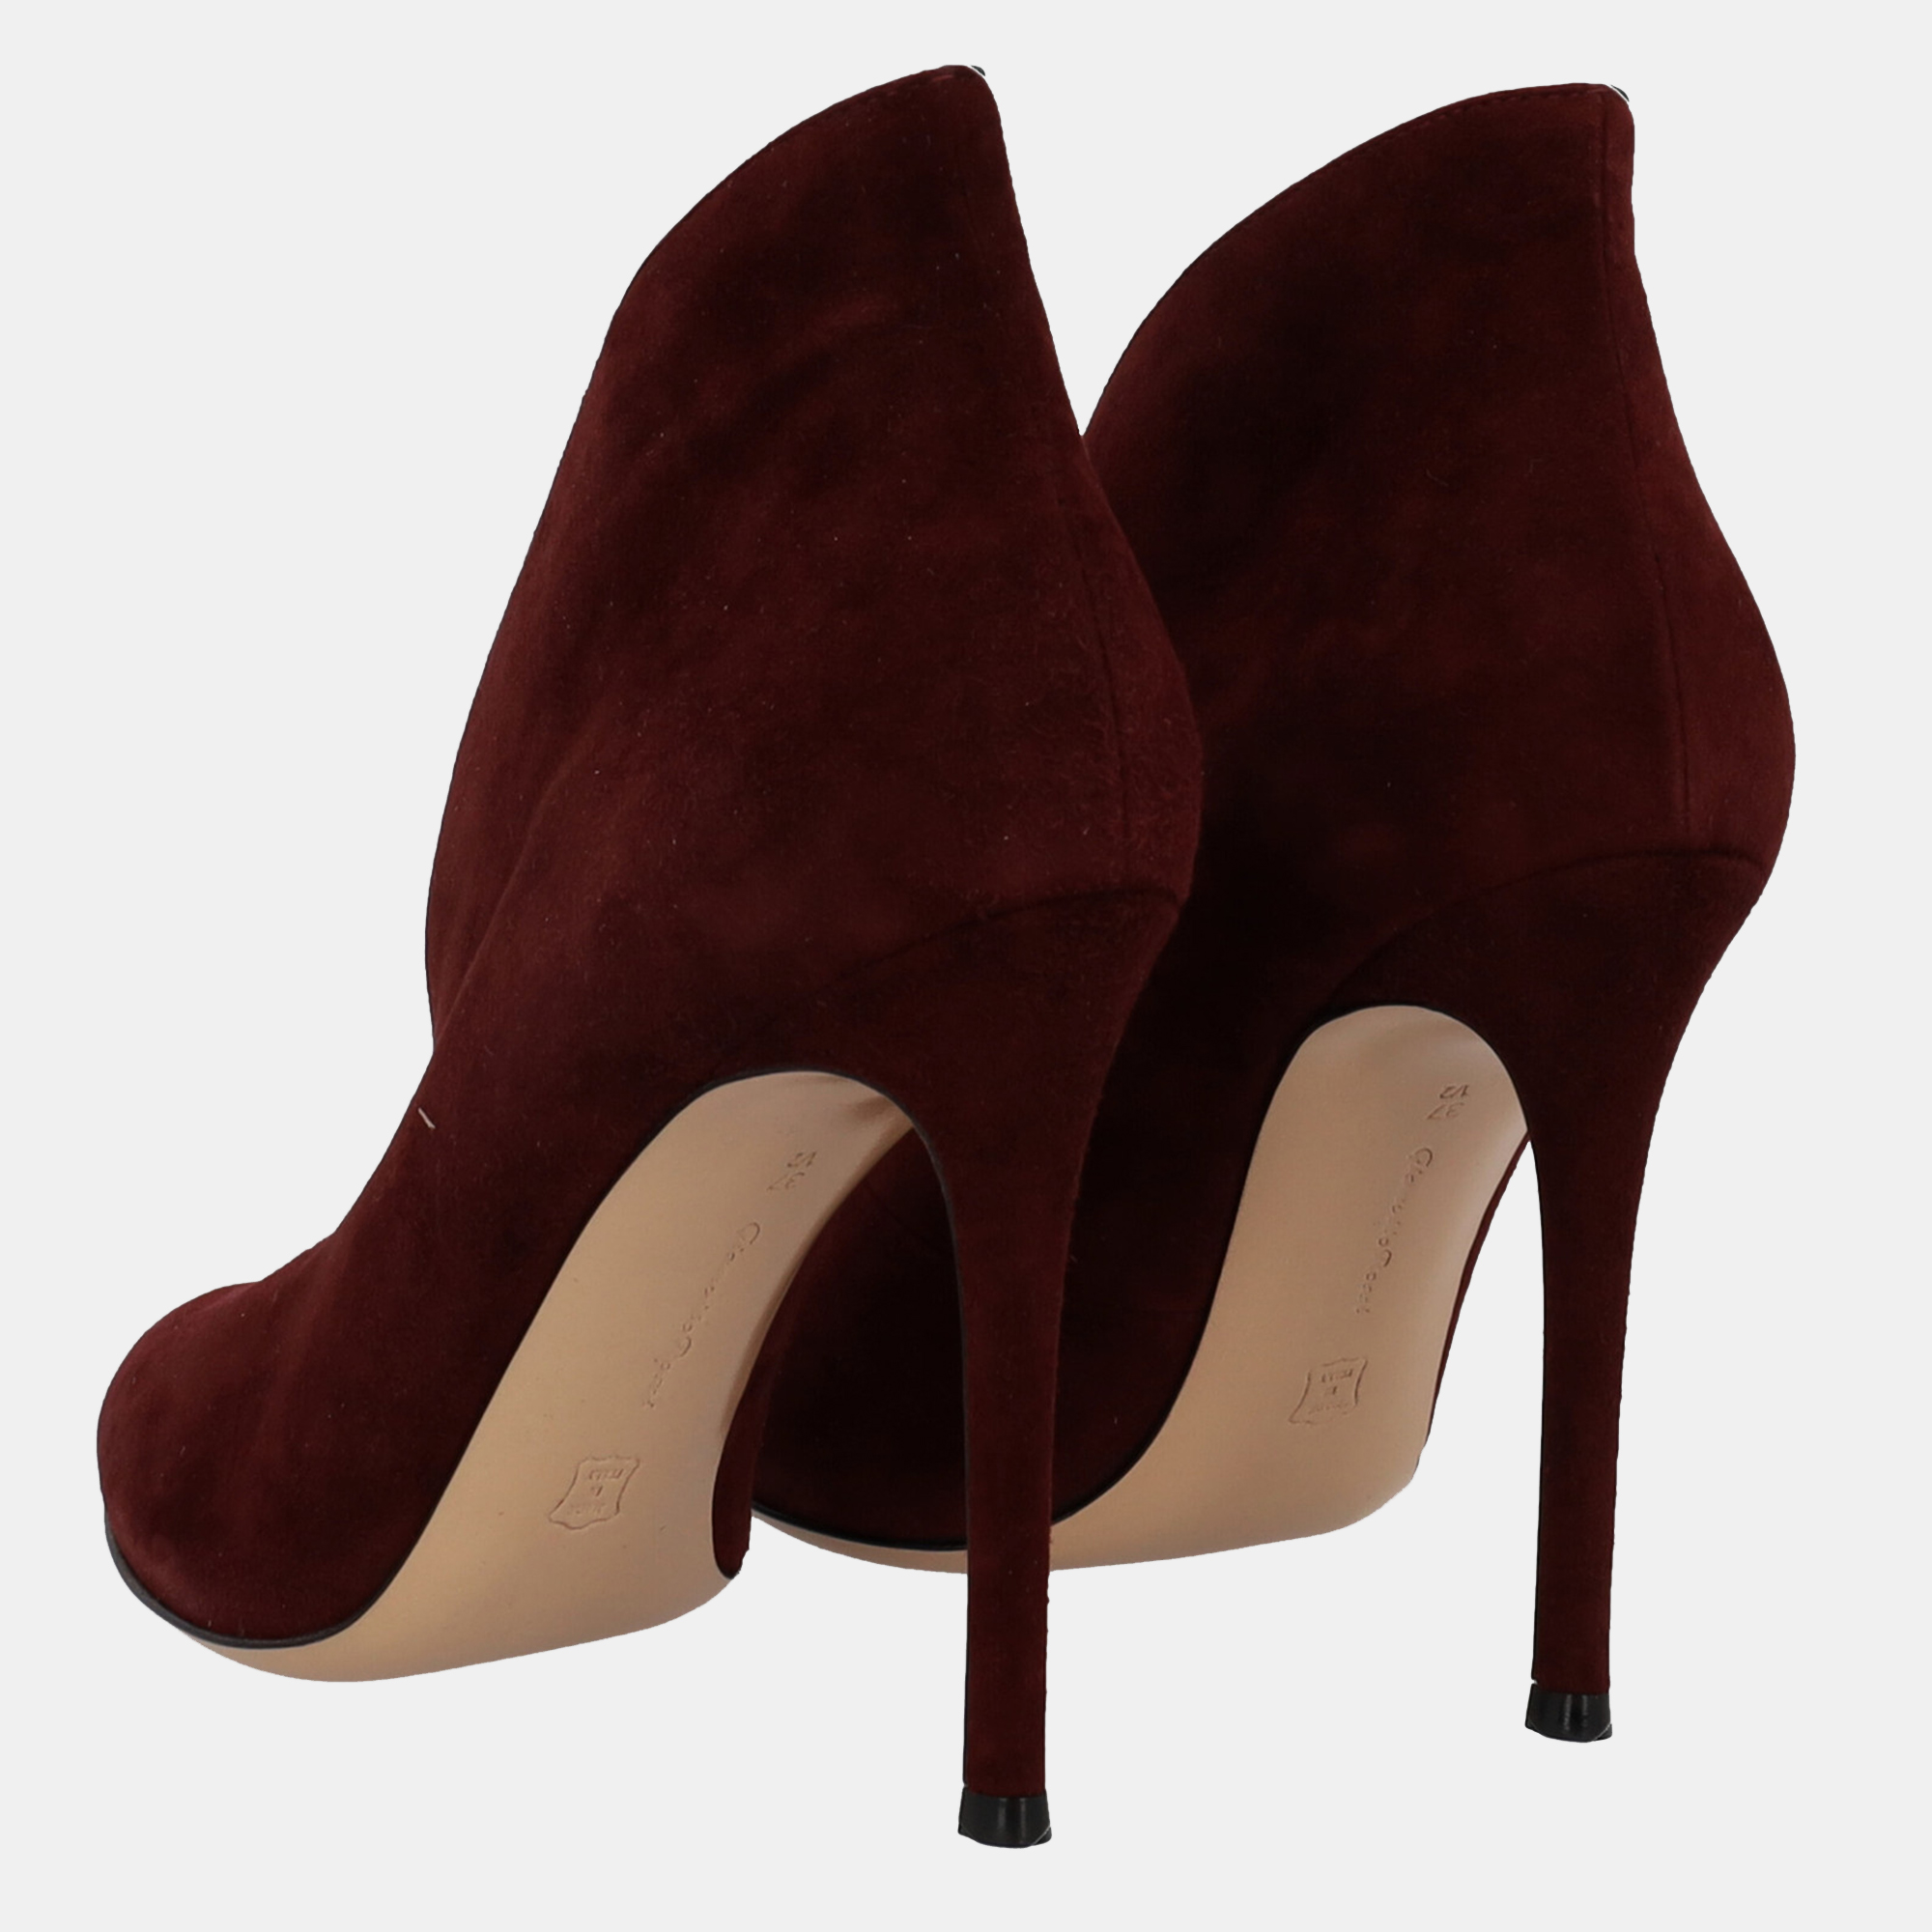 Gianvito Rossi  Women's Leather Ankle Boots - Burgundy - EU 37.5